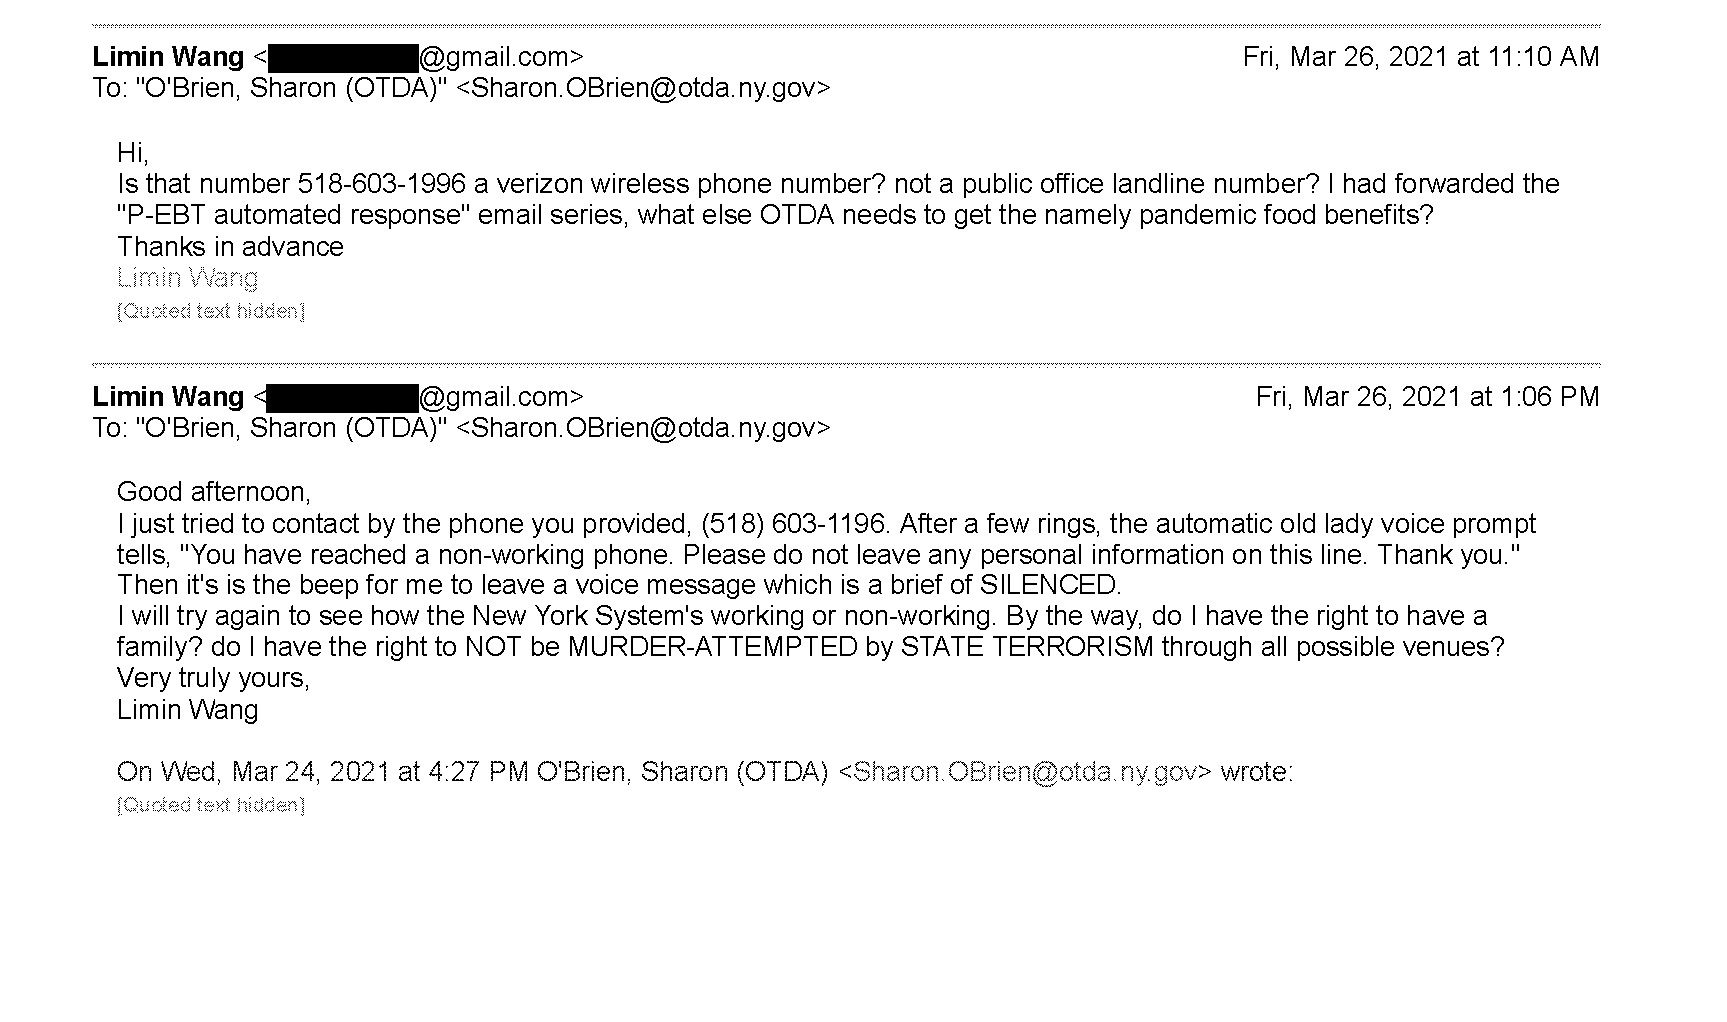 Email series Trying to contact, p4 n 5 of my replies on March 26 2021.jpg